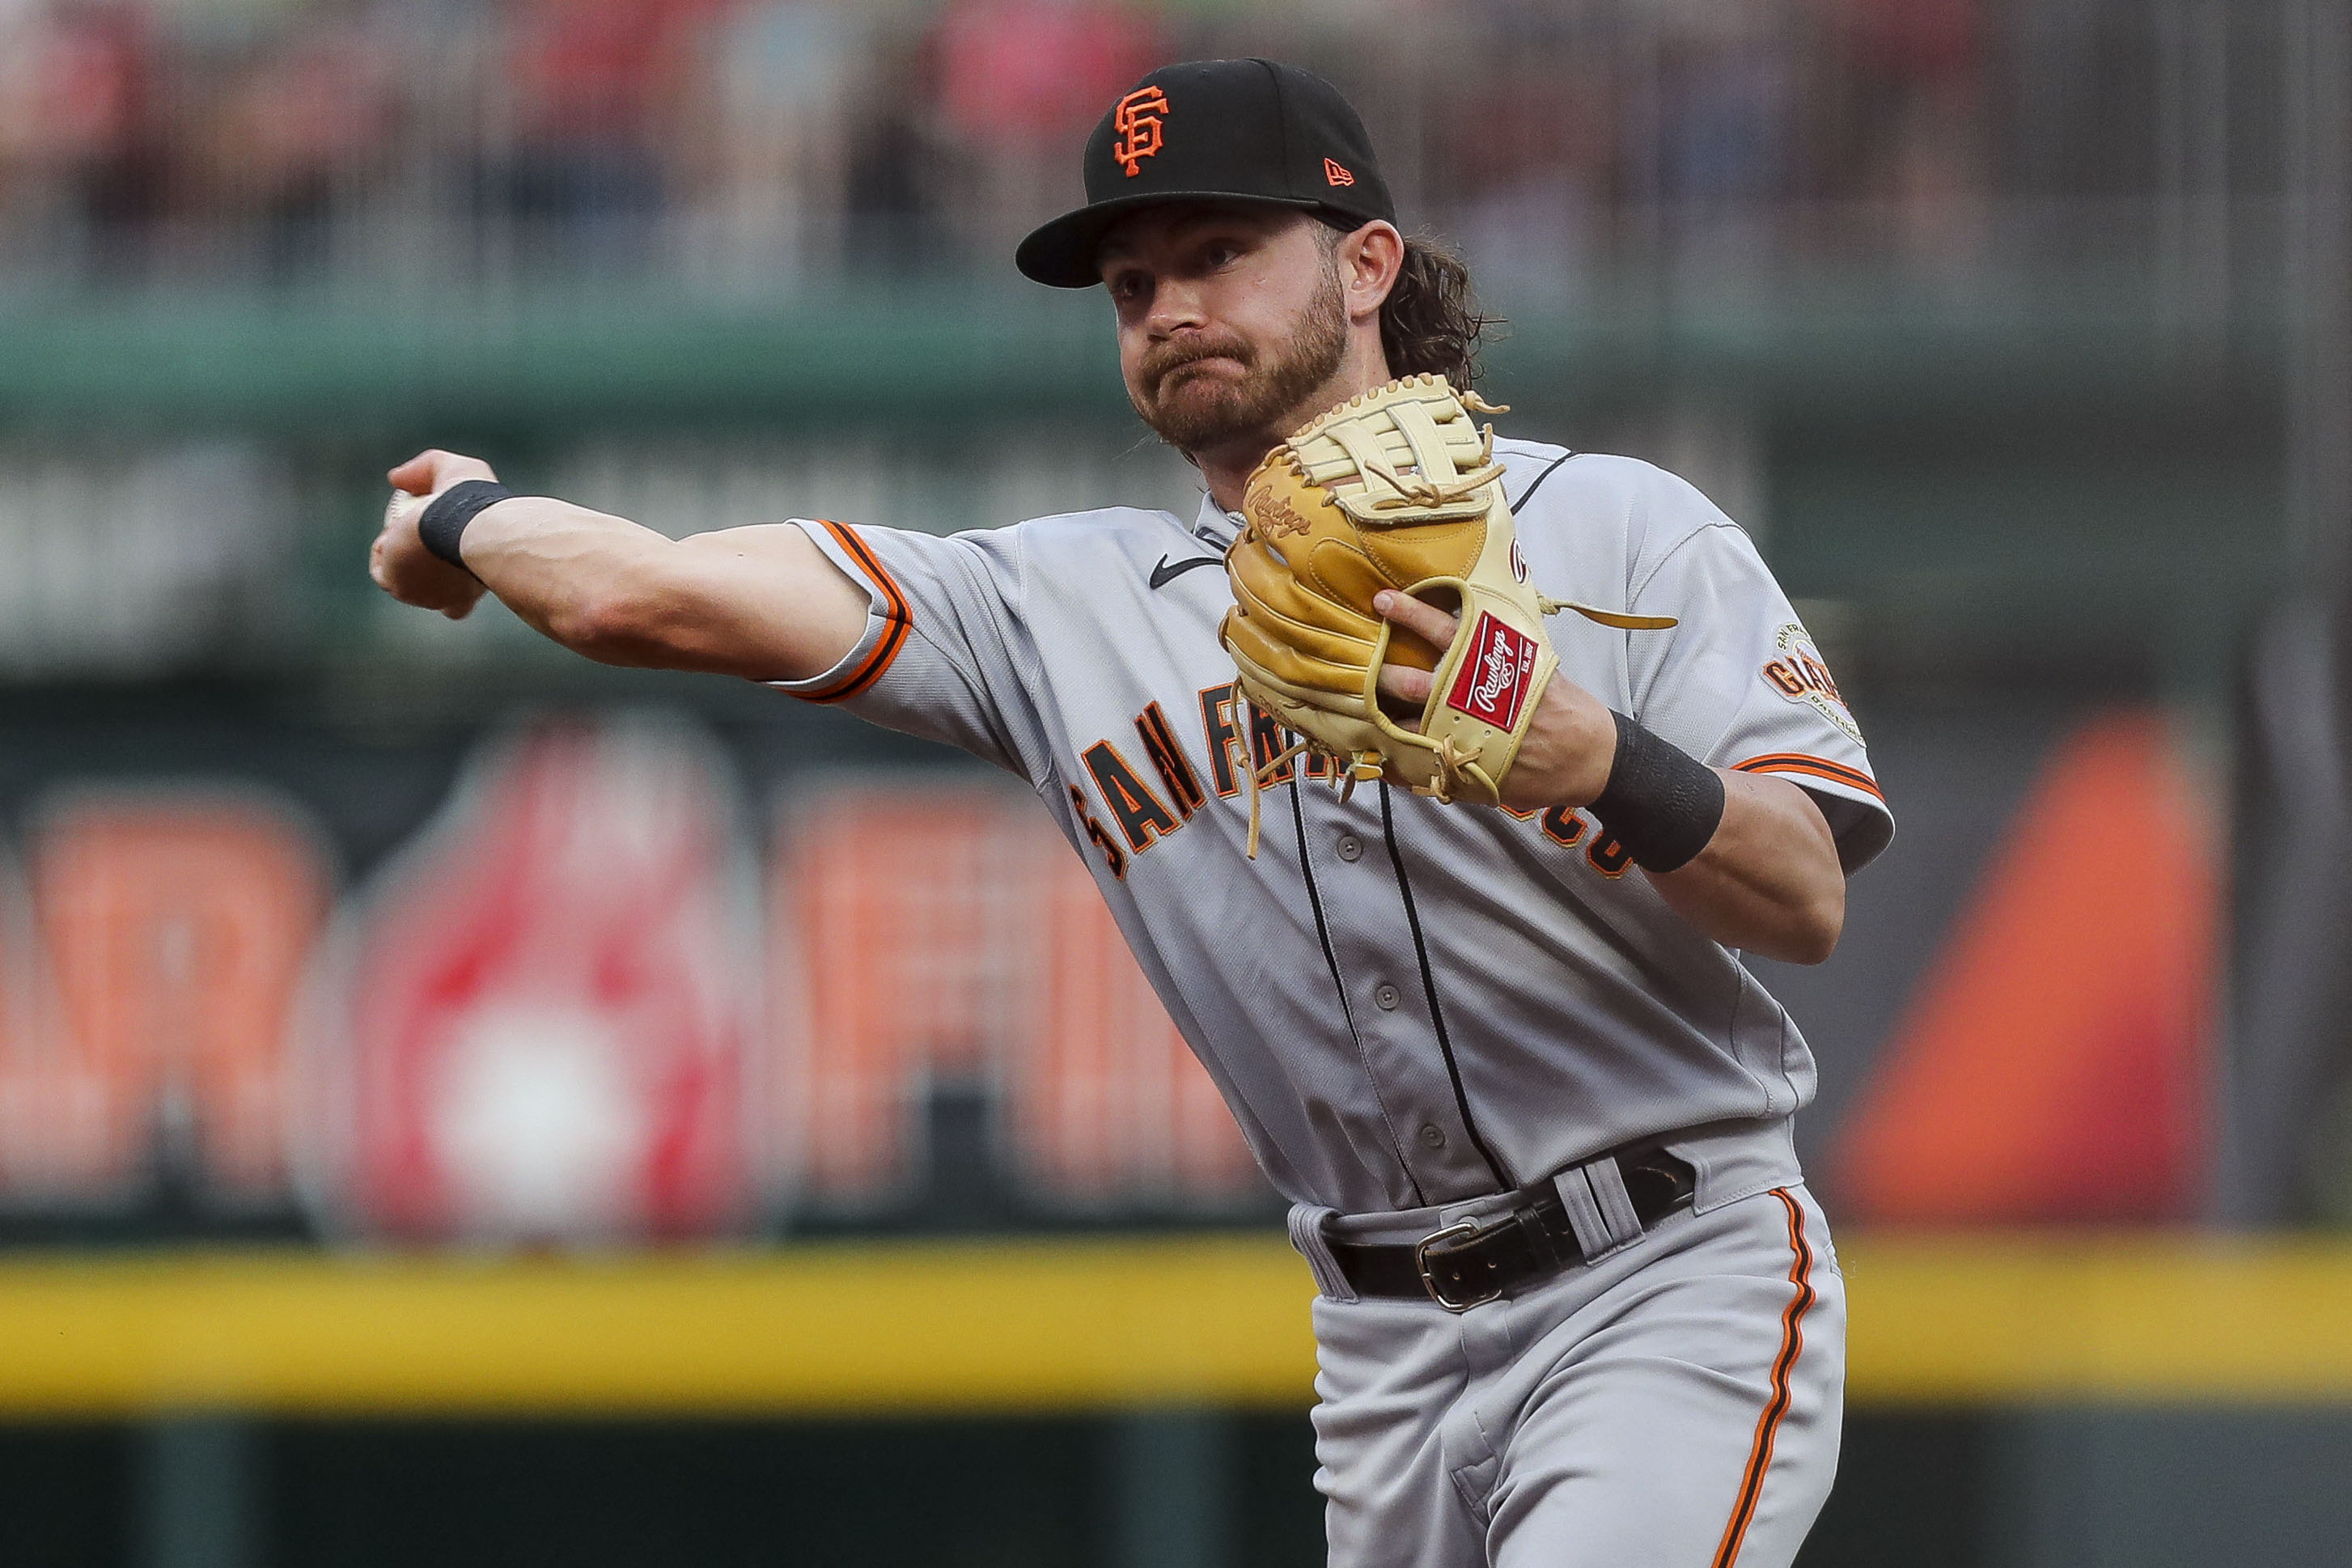 Giants-Reds suspended with game tied in 8th